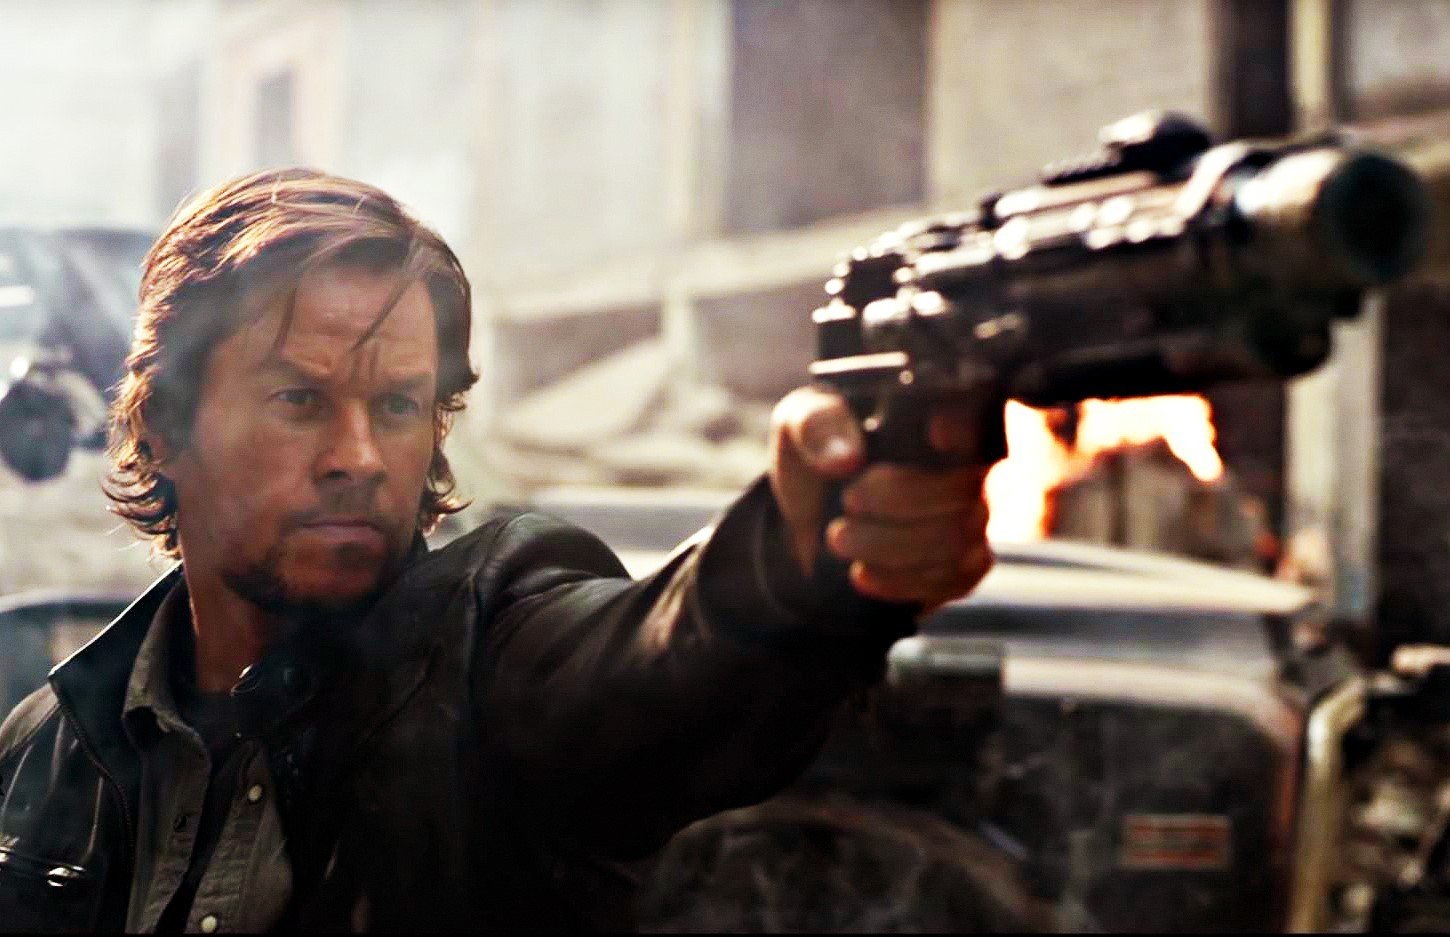 Mark Wahlberg stars as Cade Yeager in Paramount Pictures' Transformers: The Last Knight (2017)